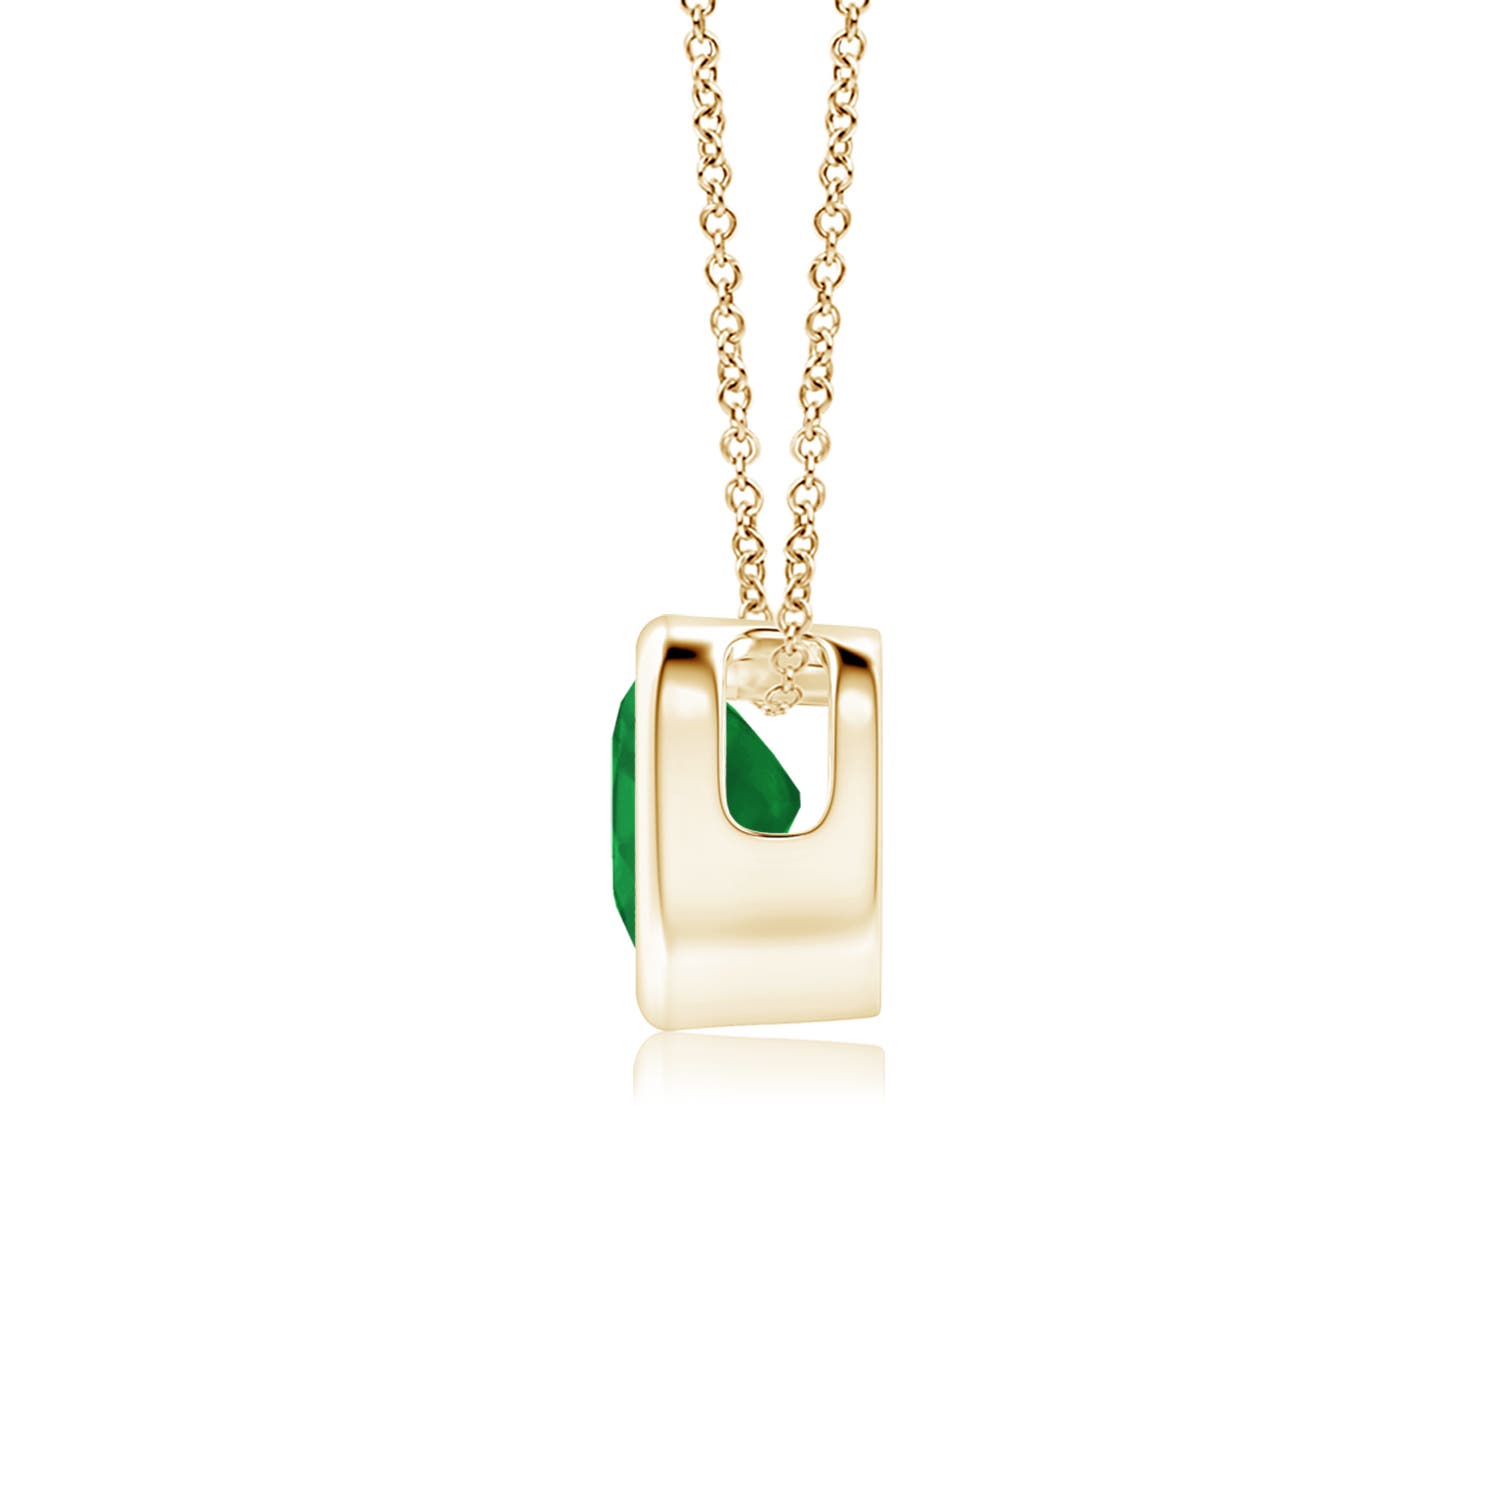 A - Emerald / 0.2 CT / 14 KT Yellow Gold